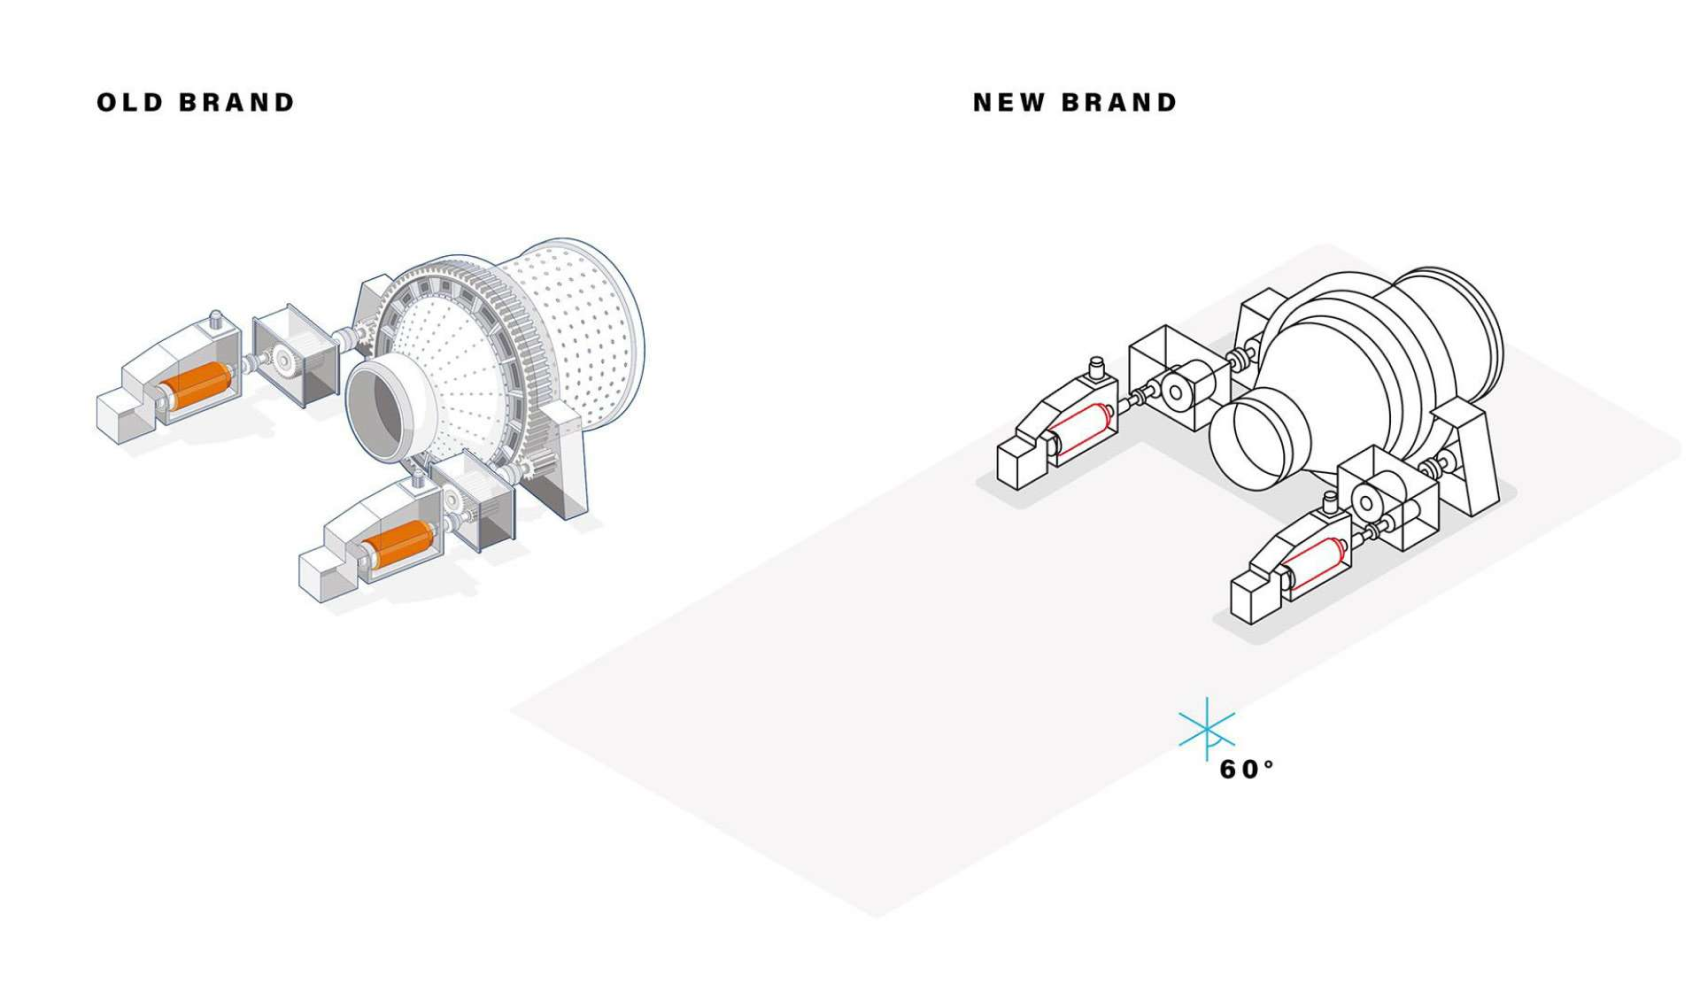 Old brand vs new brand - an example of a machine diagram redo